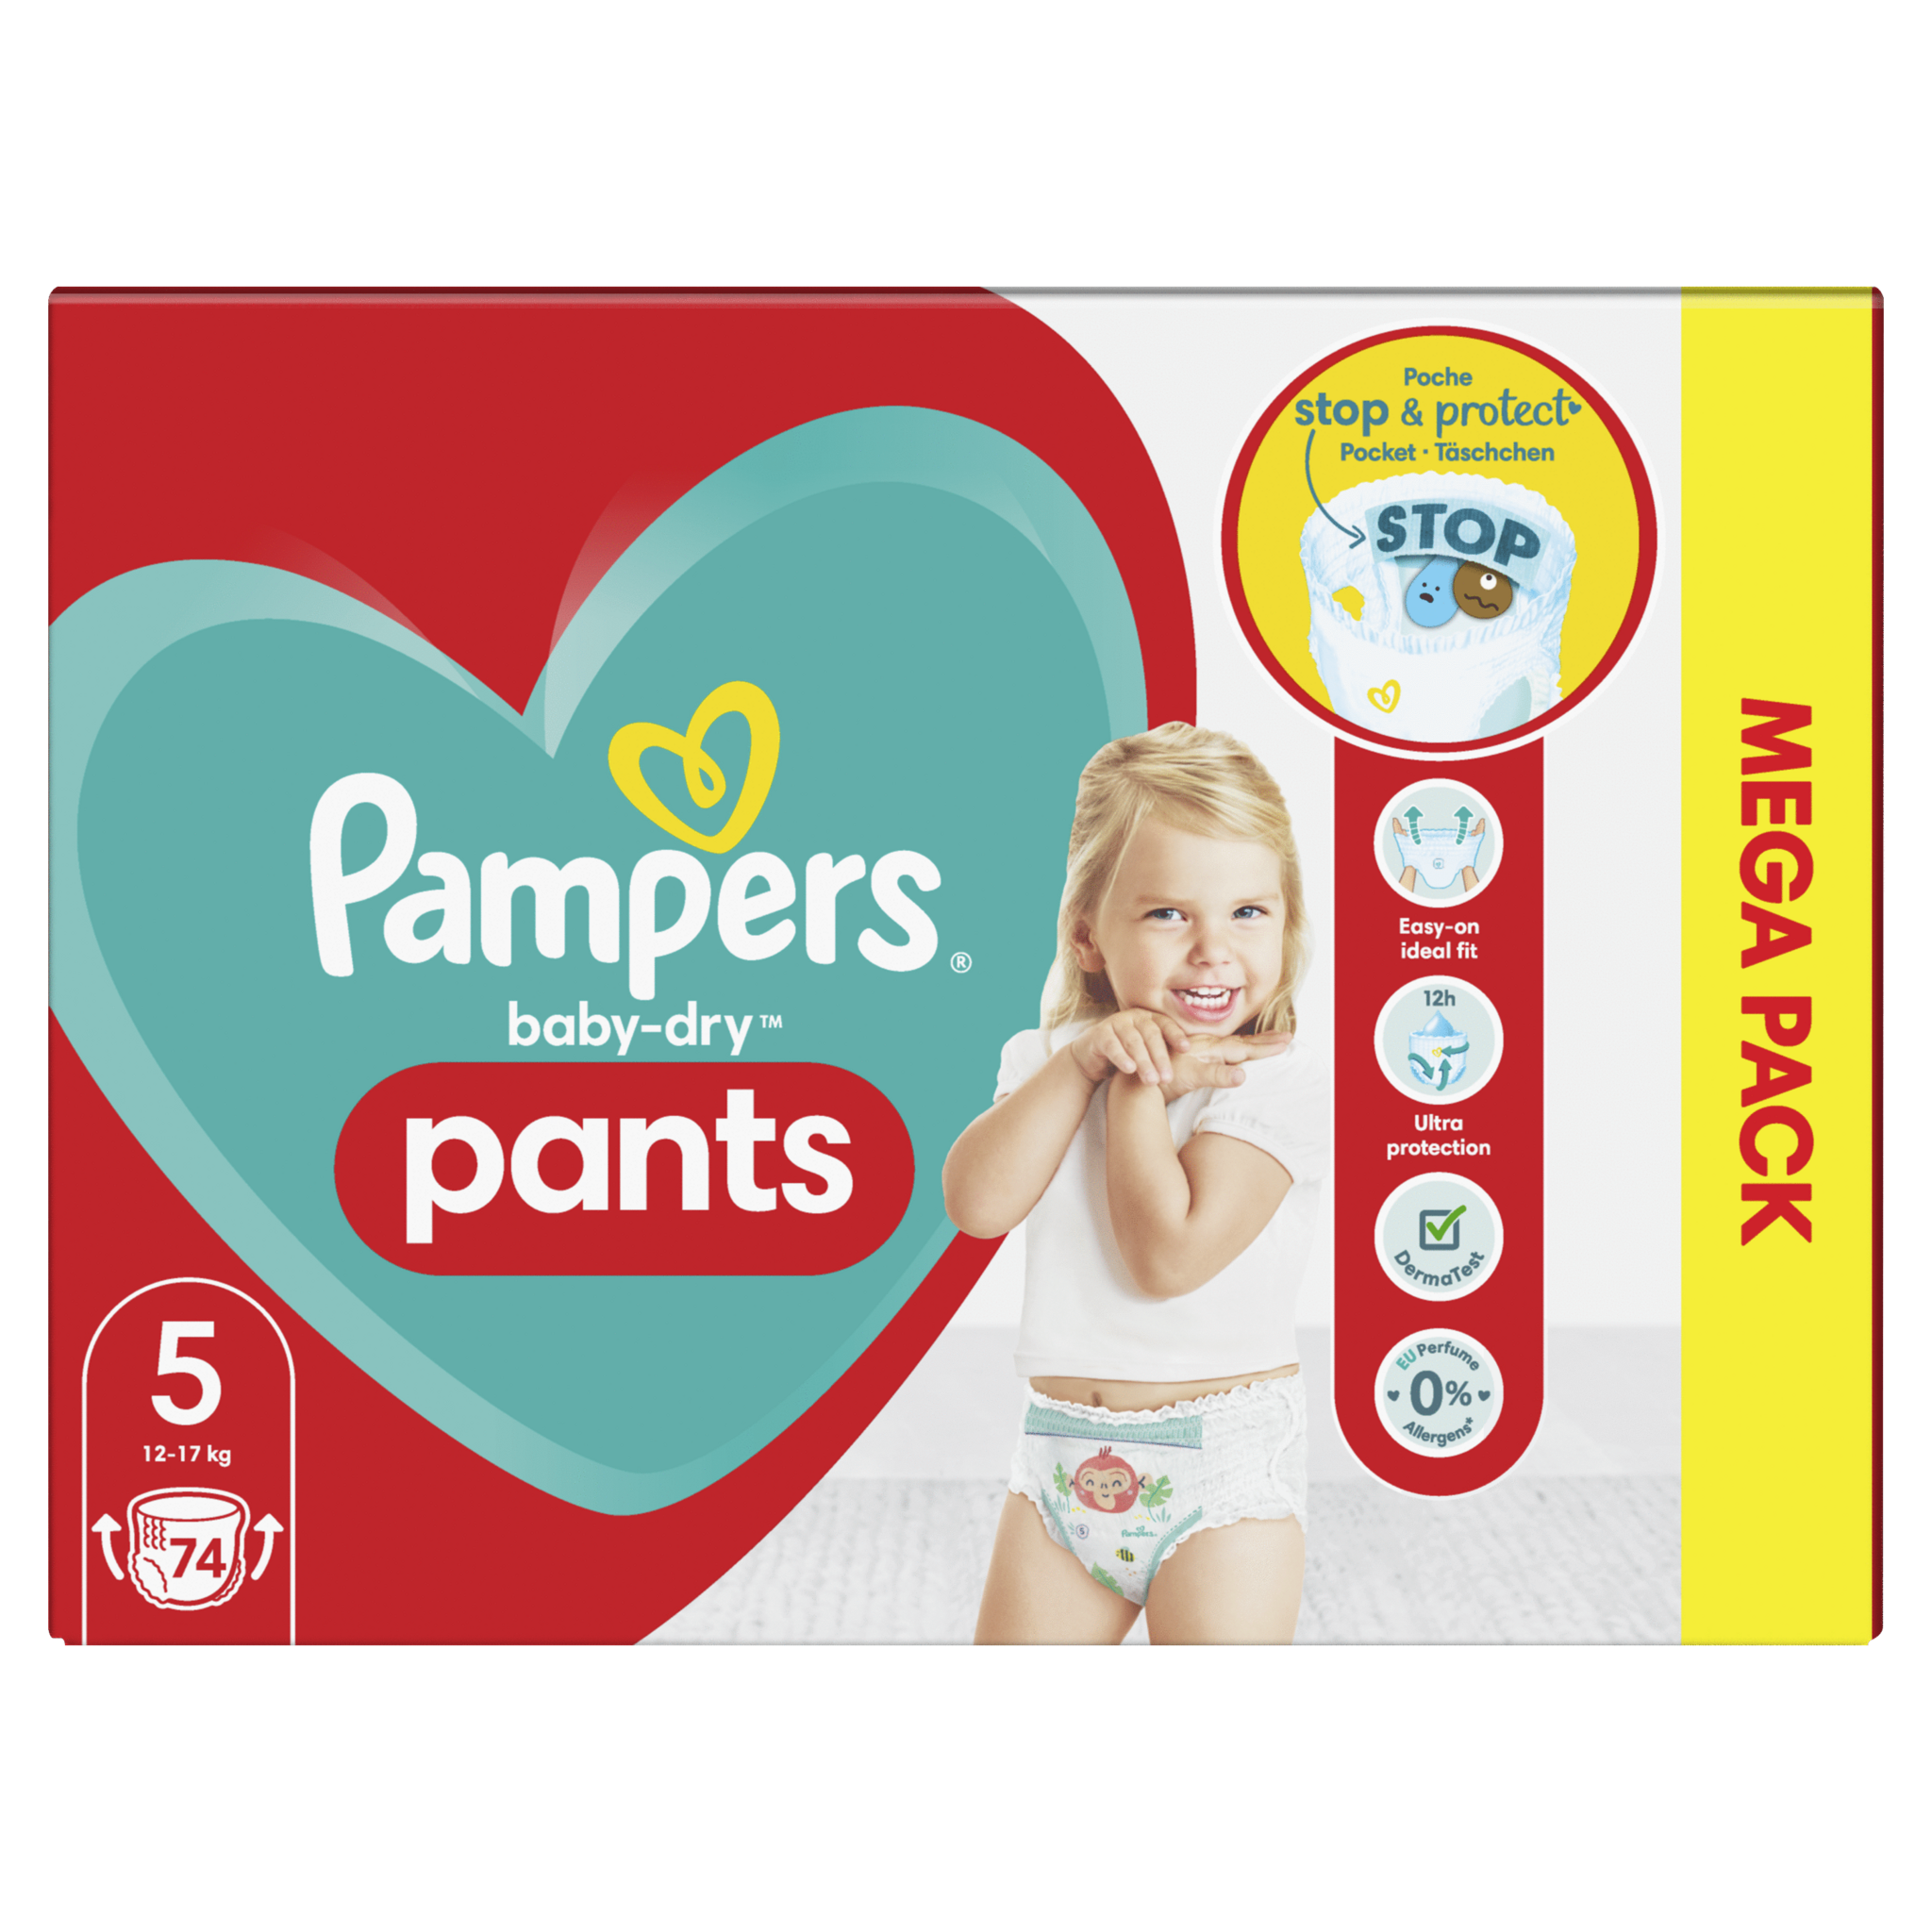 PAMPERS Pants baby-dry couche culotte taille 5 ( 12-17kg ) 74 couches pas  cher 